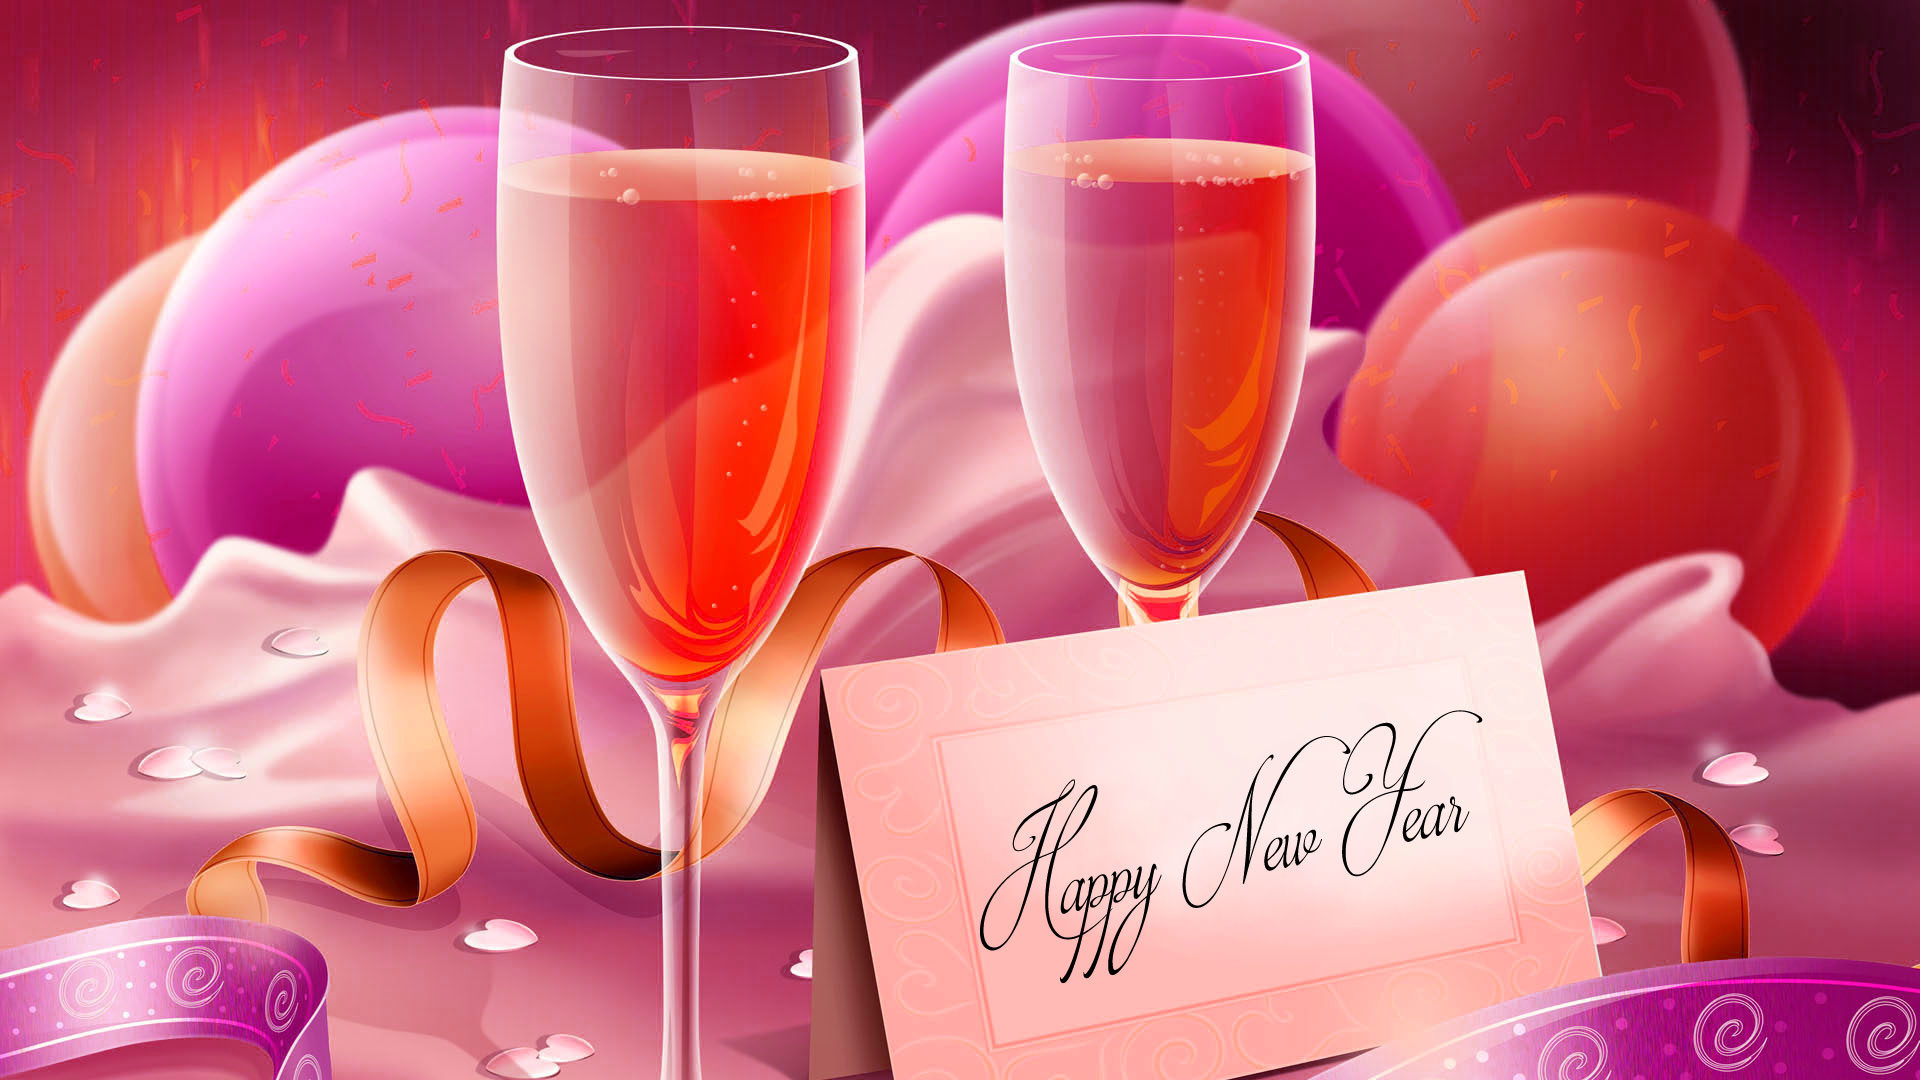 1920x1080 Happy New Year Wallpapers With Wine Glasses